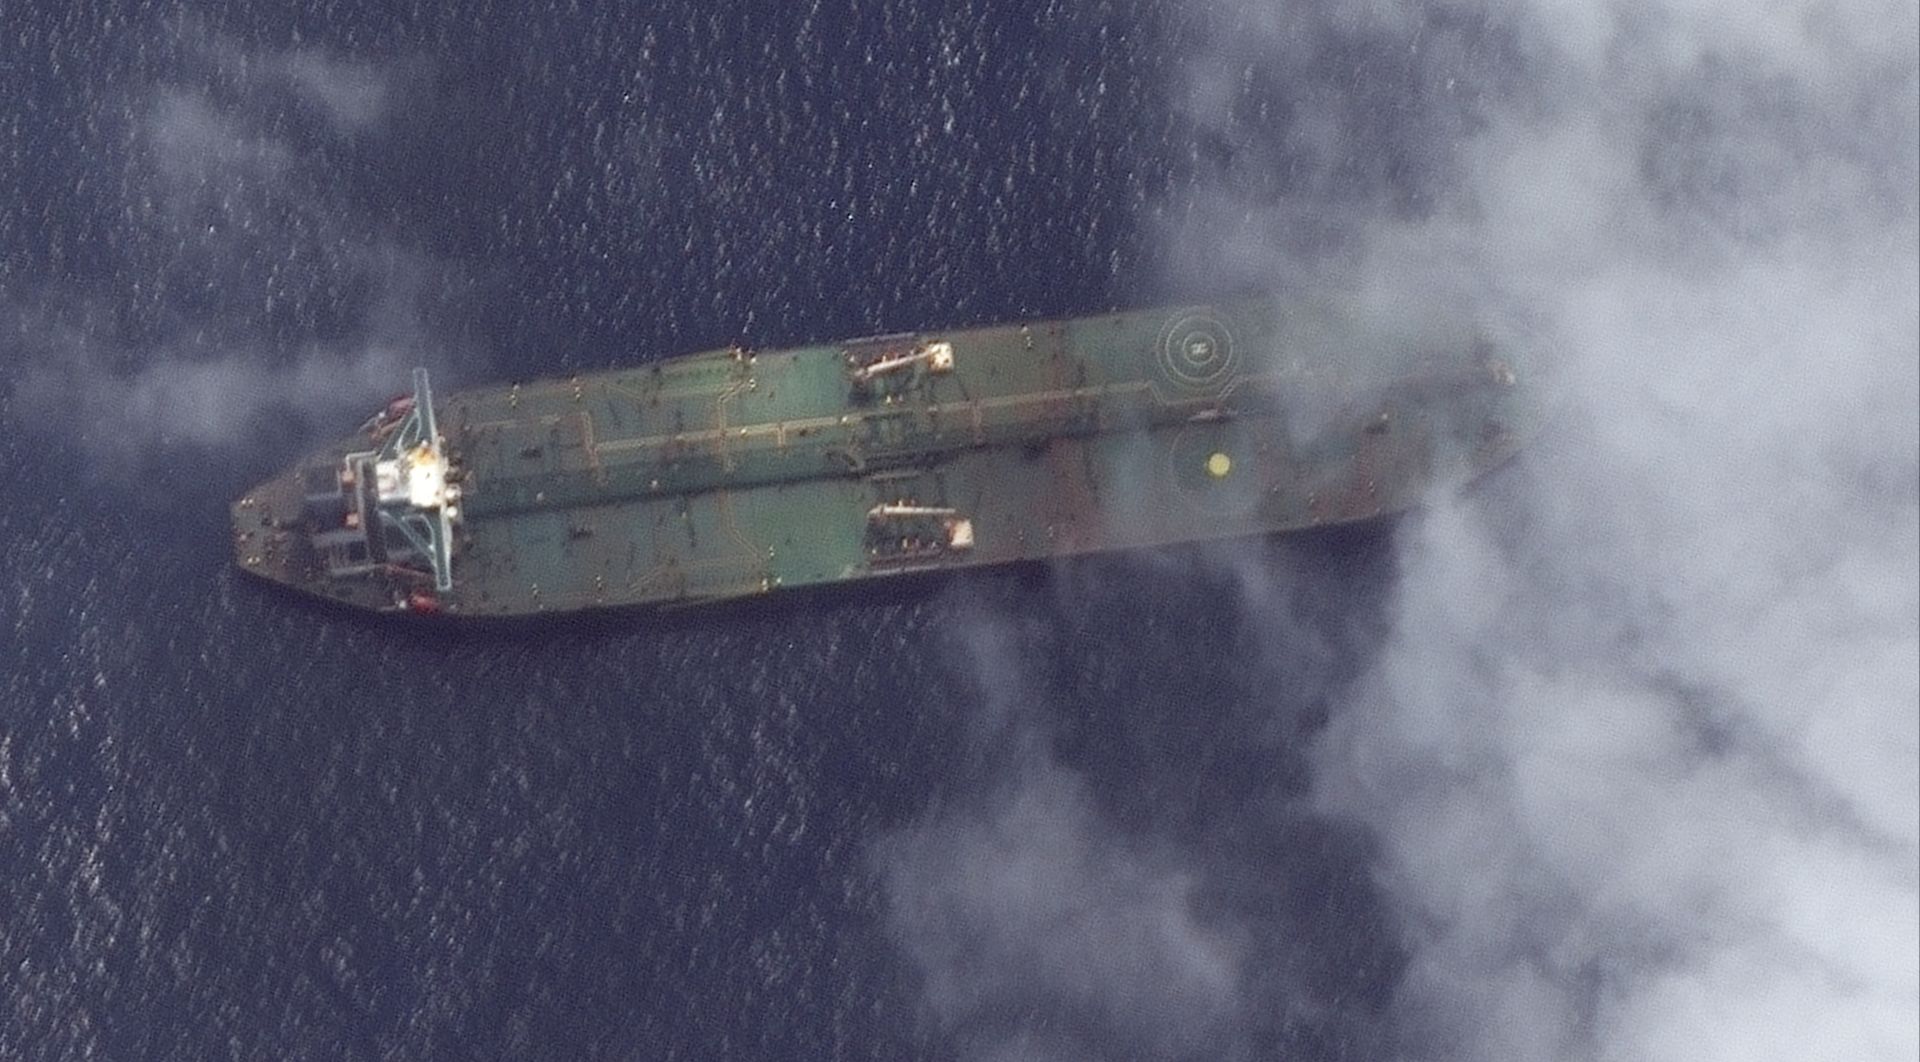 epa07832775 A satellite photo made available by MAXAR Technologies on 07 September 2019 shows a satellite image of the Adrian Darya-1 oil tanker off the coast of Tartus, Syria, 06 September 2019 (reissued 10 September 2019). Reports on 10 September 2019 state British government has summoned Iran's ambassador to comdemn Iranian oil tanker 'Adrian Darya 1', loaded with some 2.1 million barrels of oil and formerly know as the 'Grace 1', delivering its oil to Syria. The British Foreign Minister Dominic Raab said 'Iran has shown complete disregard for its own assurances over Adrian Darya 1. Raab further said 'This sale of oil to (Syrian President Bashar al-Assad’s) brutal regime is part of a pattern of behaviour by the Government of Iran designed to disrupt regional security'.  EPA/SATELLITE IMAGE ©2019 MAXAR TECHNOLOGIES / HANDOUT (Satellite image © 2018 DigitalGlobe, a Maxar company) The watermark may not be removed/cropped. HANDOUT EDITORIAL USE ONLY/NO SALES